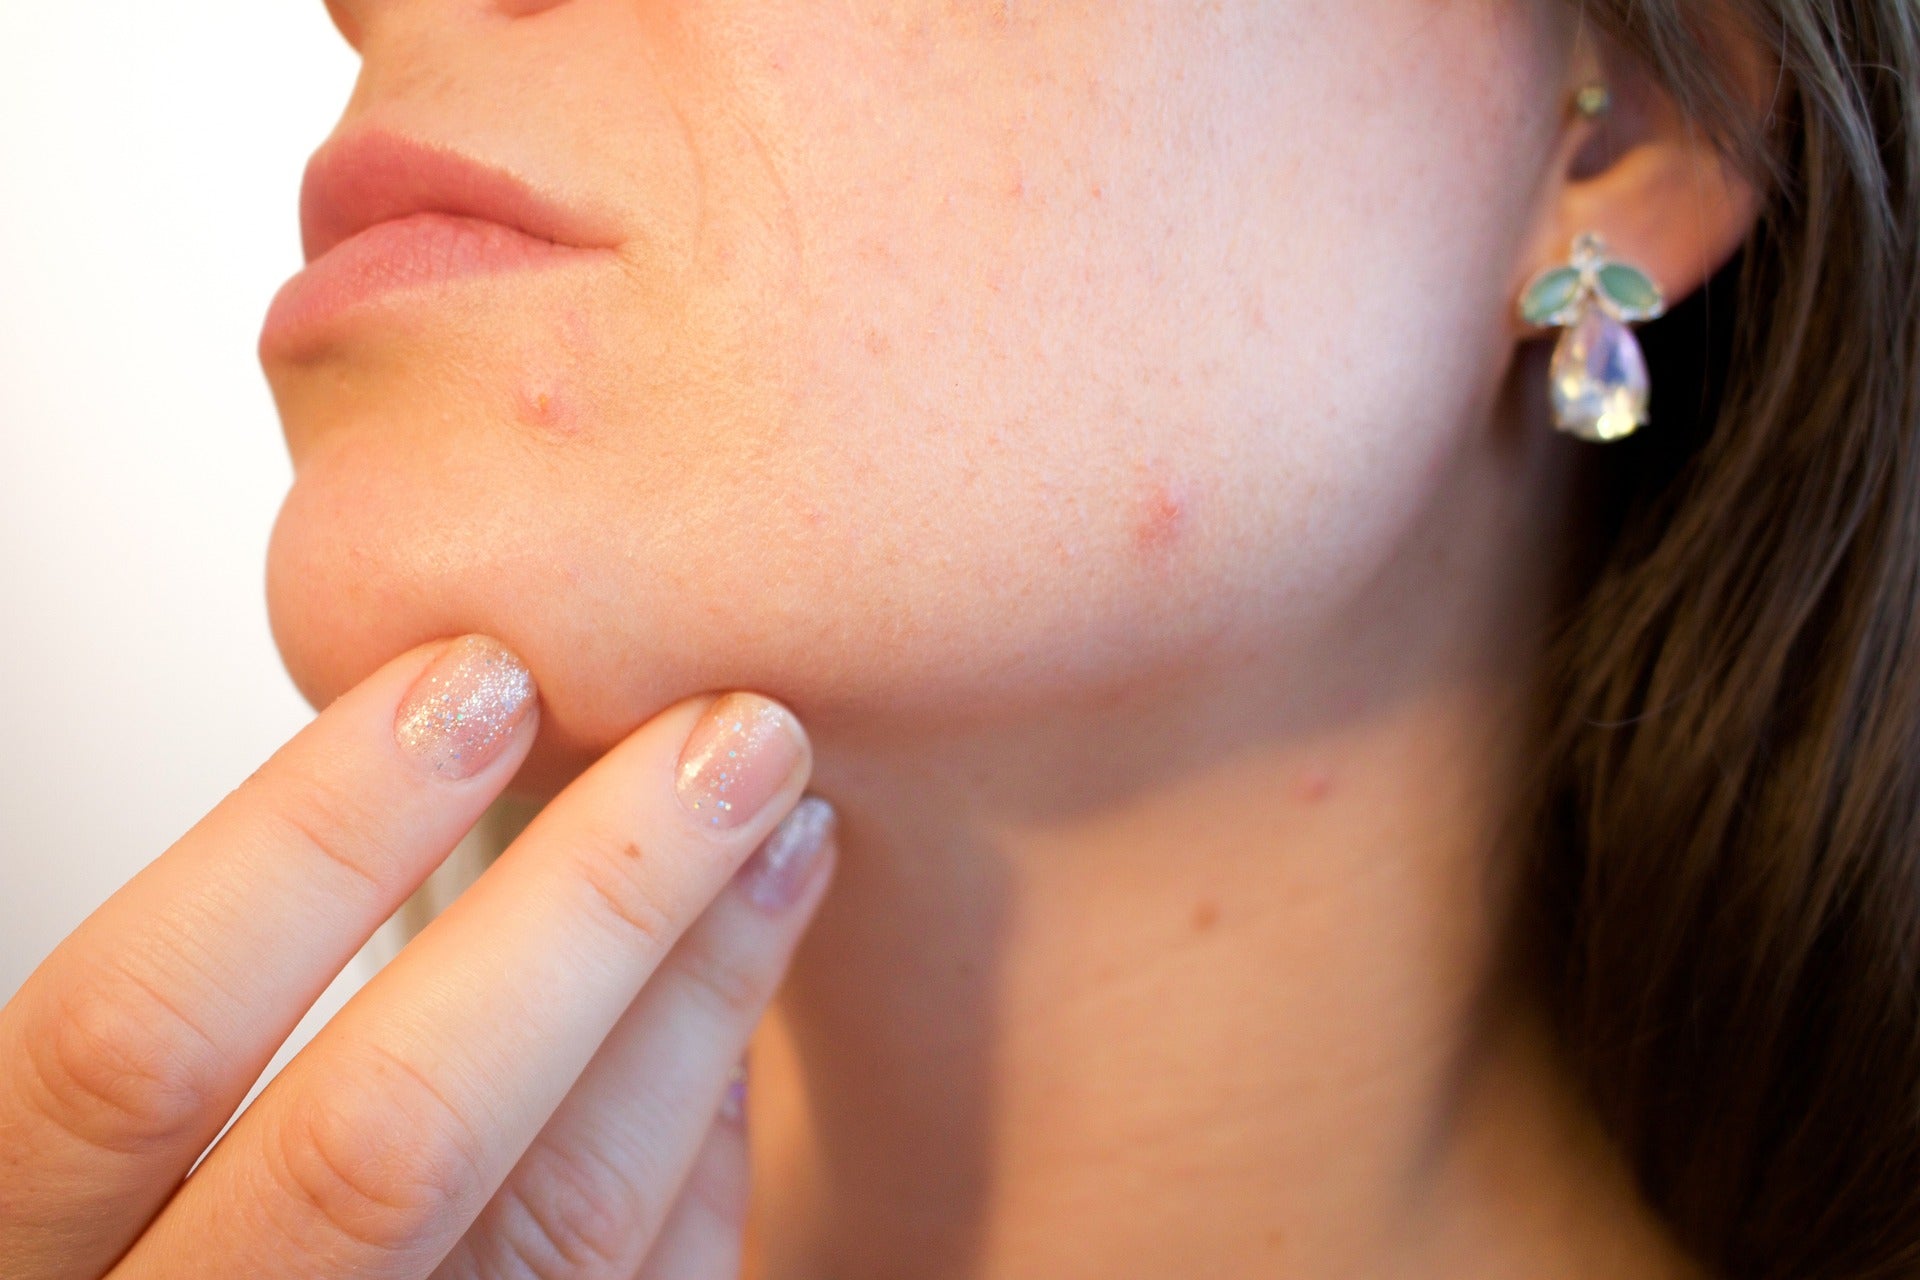 woman with acne because of toxic ingredients in skincare she's using